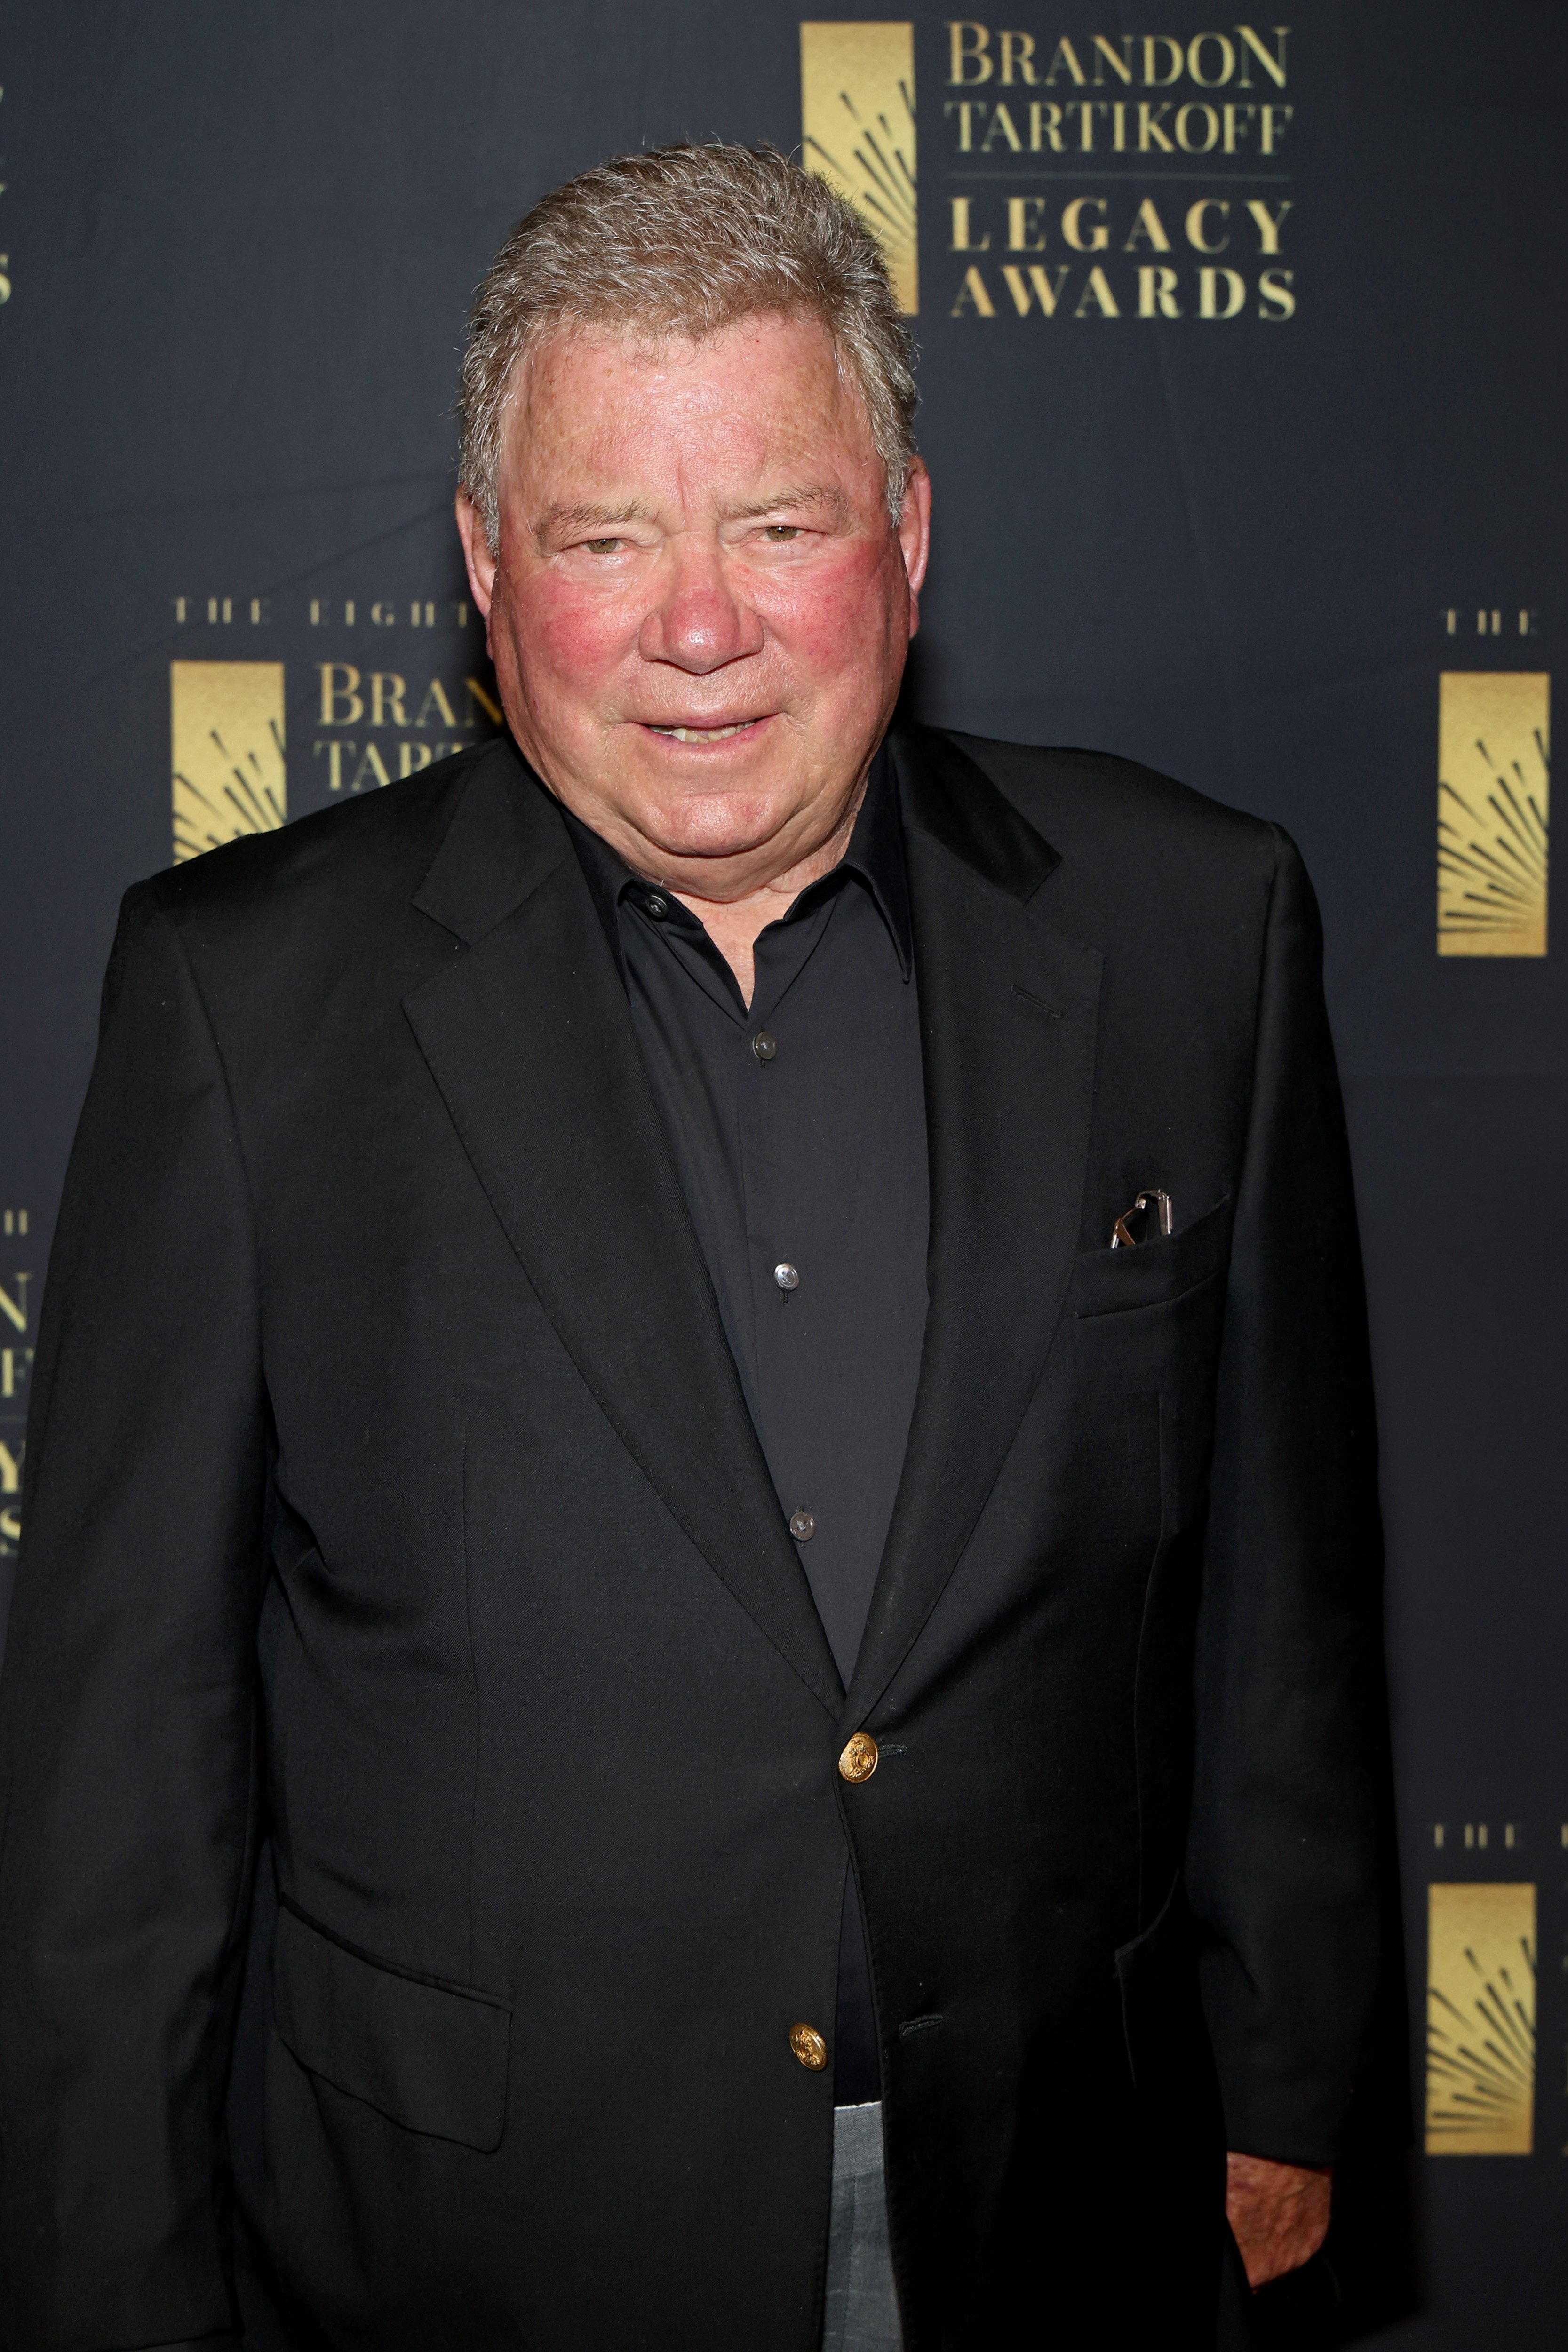 William Shatner at the 18th Annual Brandon Tartikoff Legacy Awards on June 02, 2022, in California. | Source: Getty Images